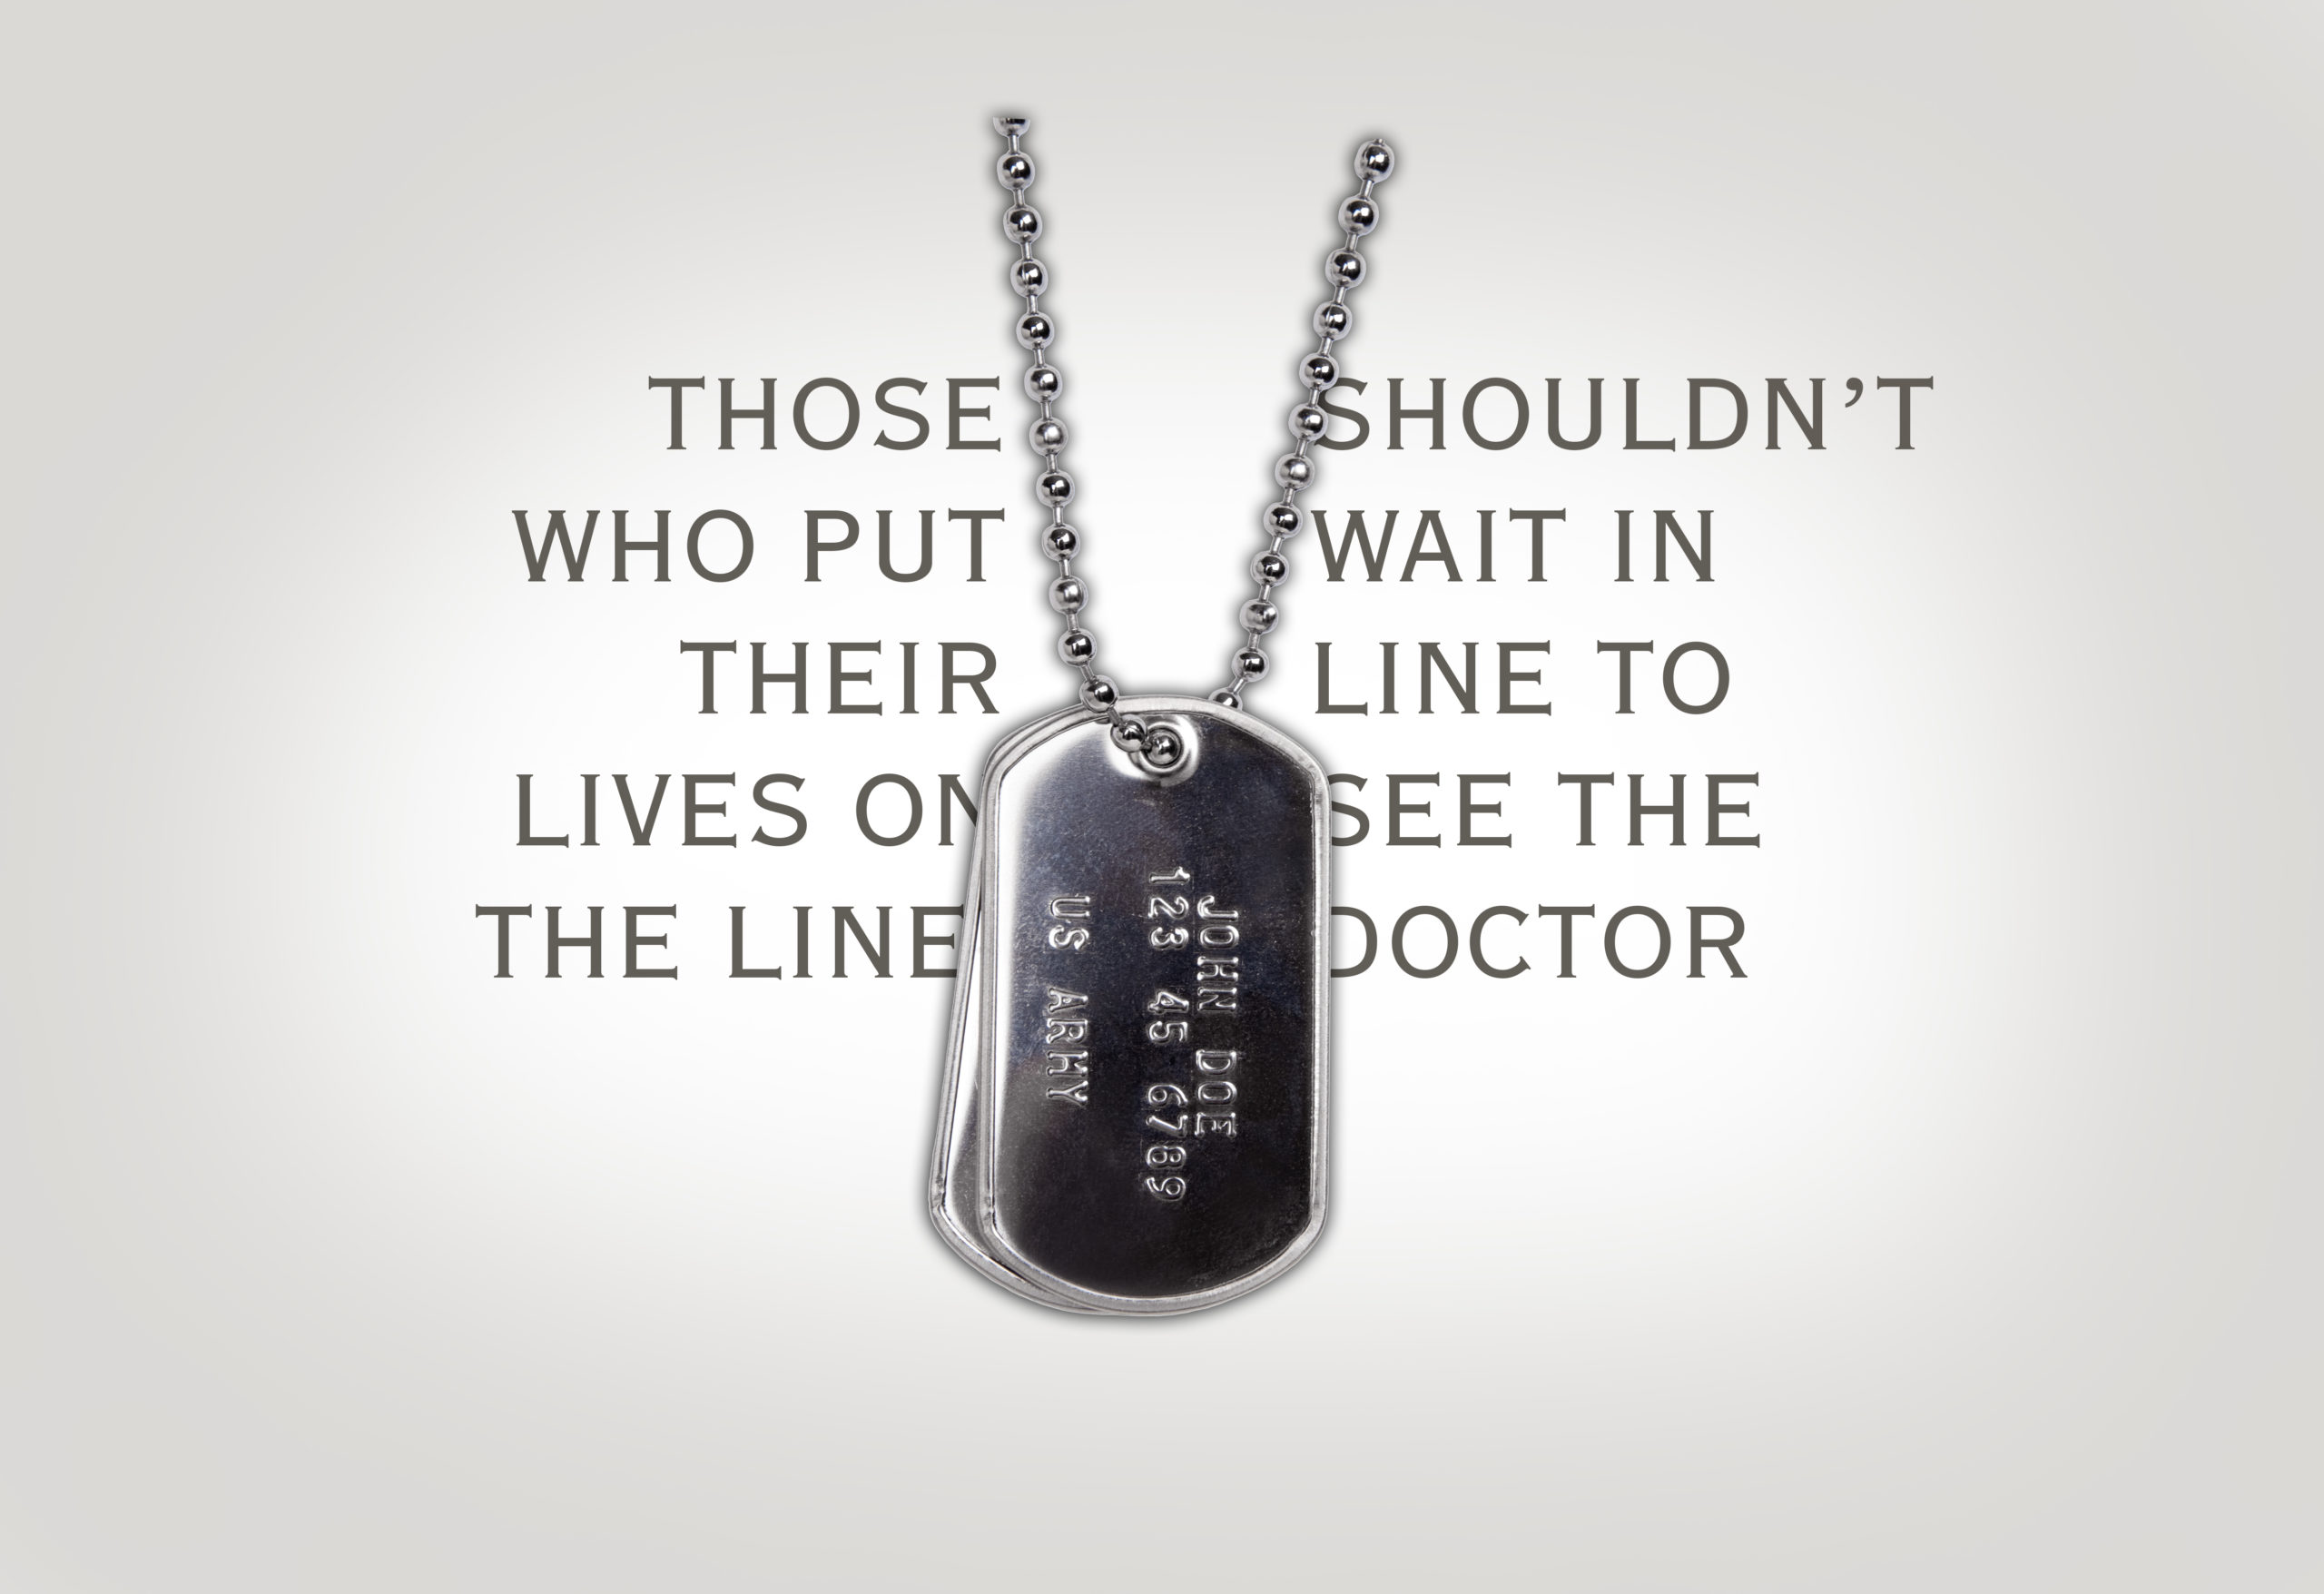 US Army dog tags with a fictitious name and number on them isolated on white.